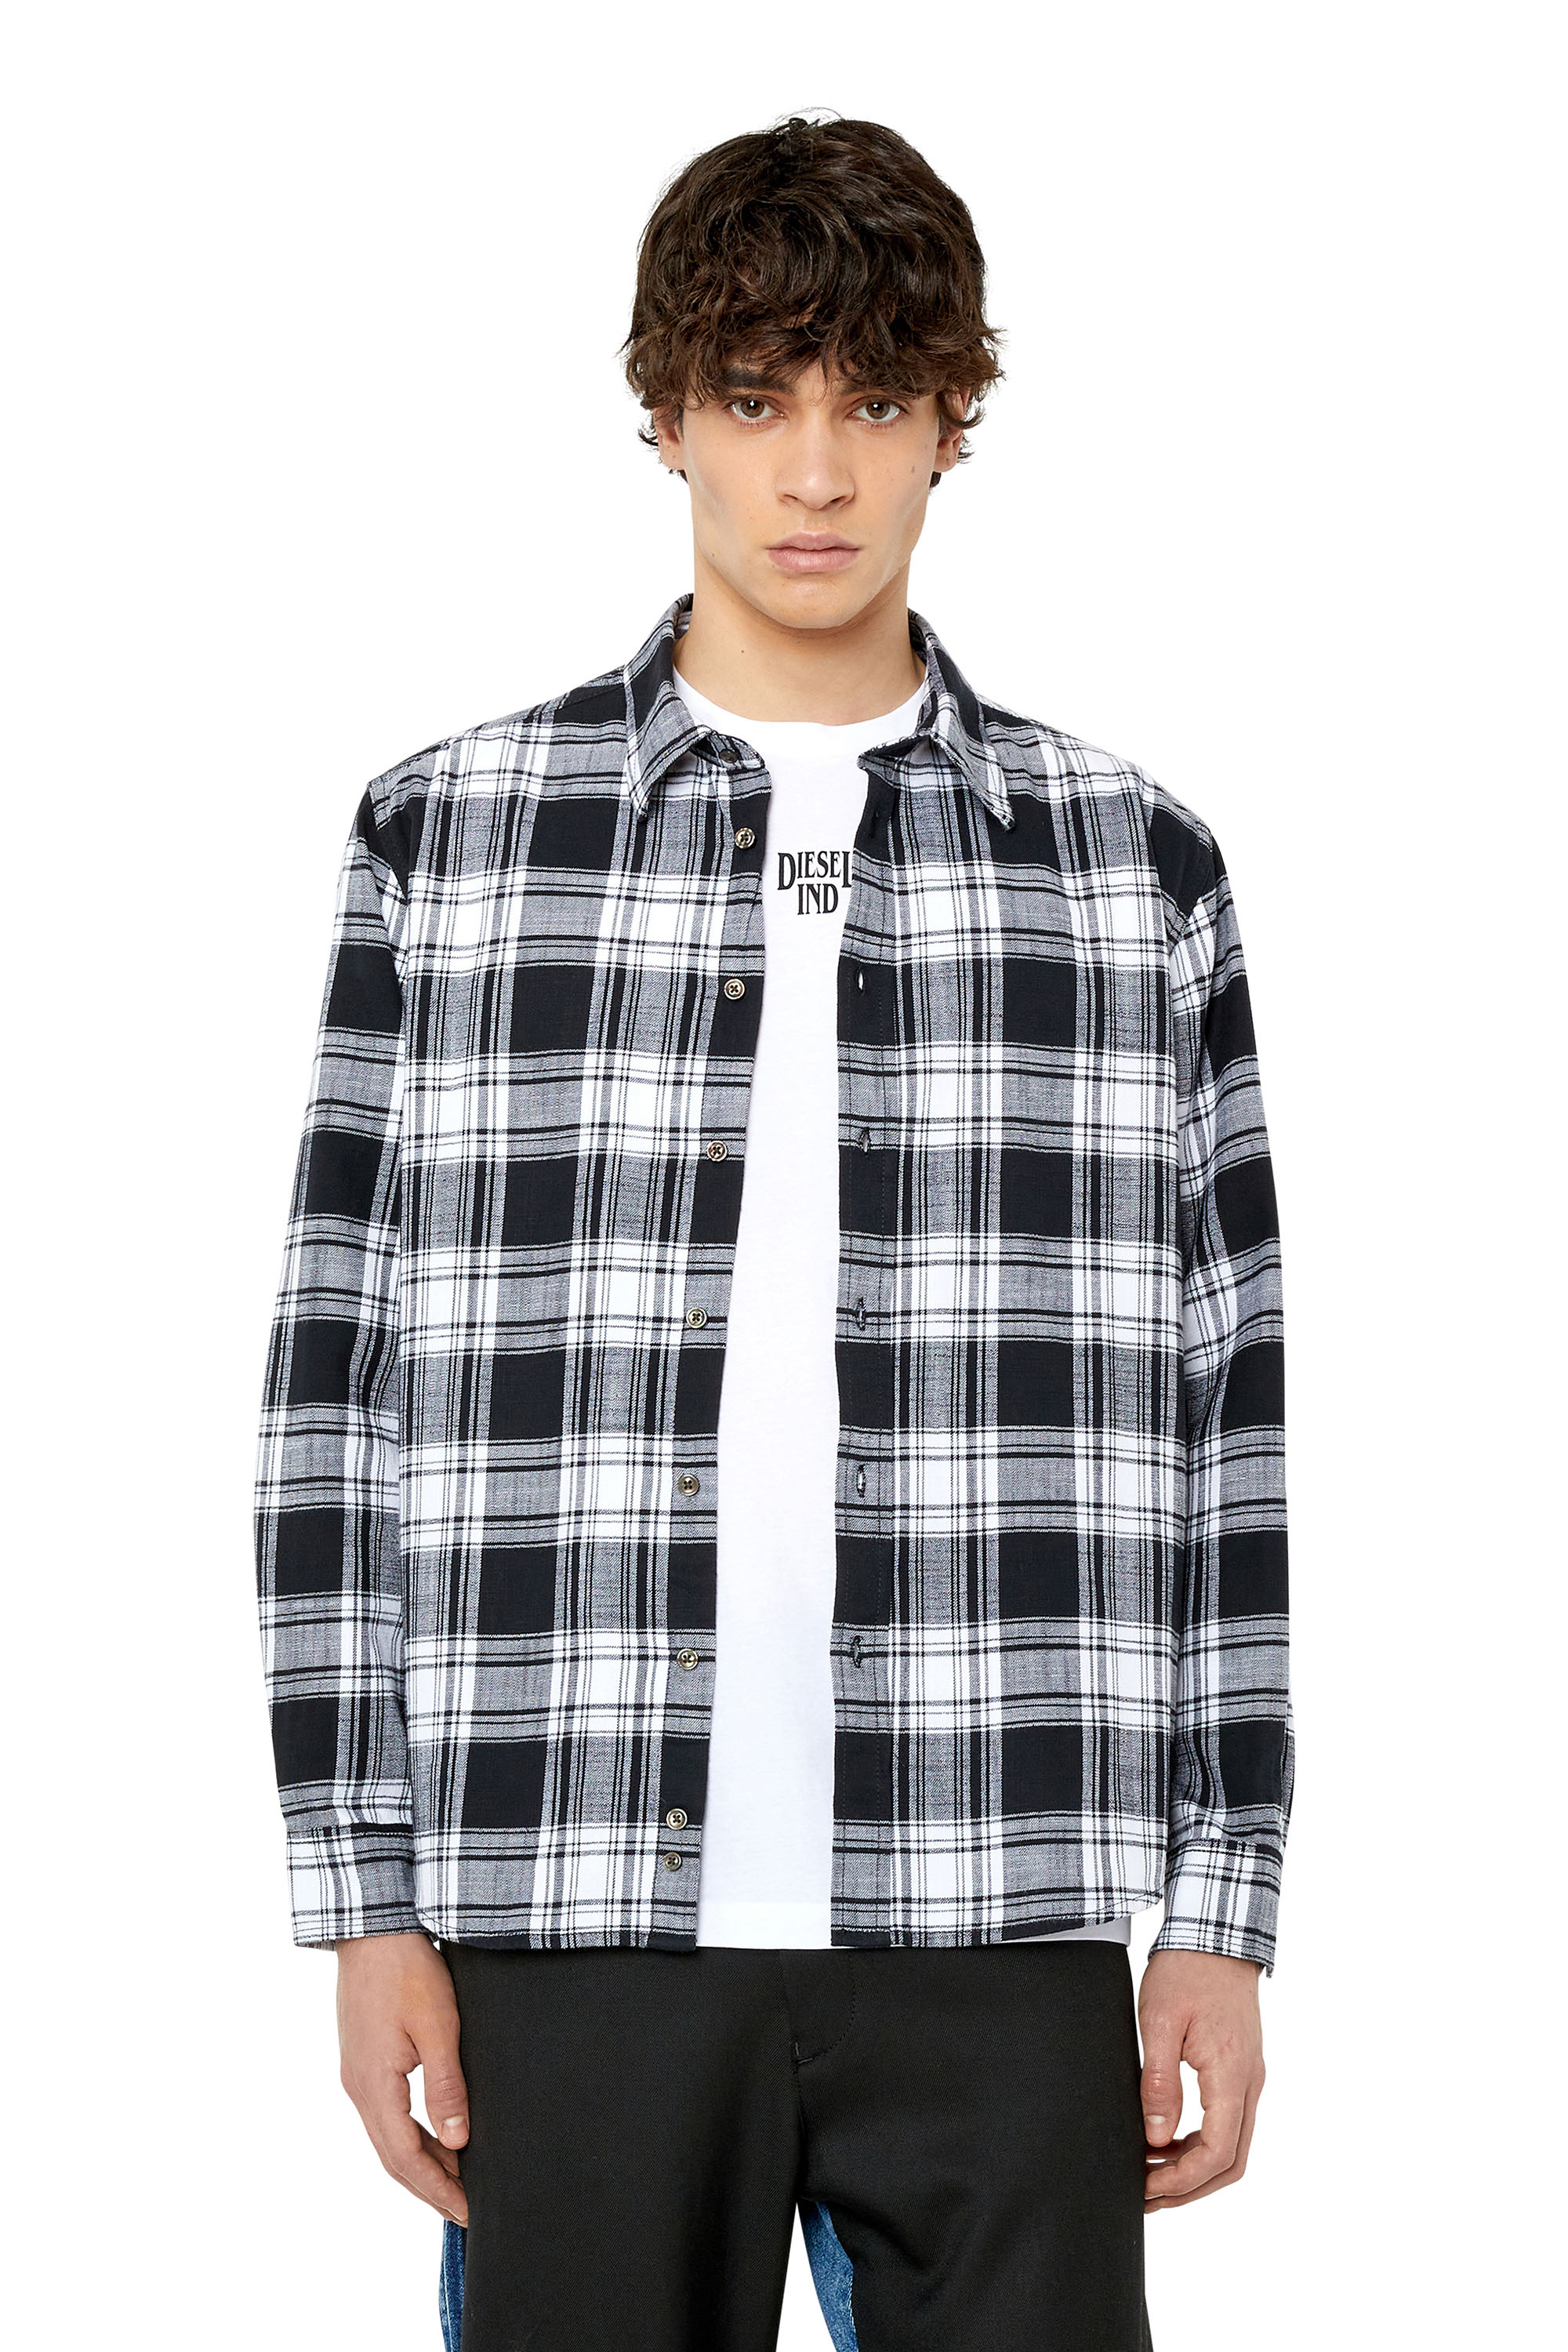 Diesel Check Flannel Shirt In Multicolor